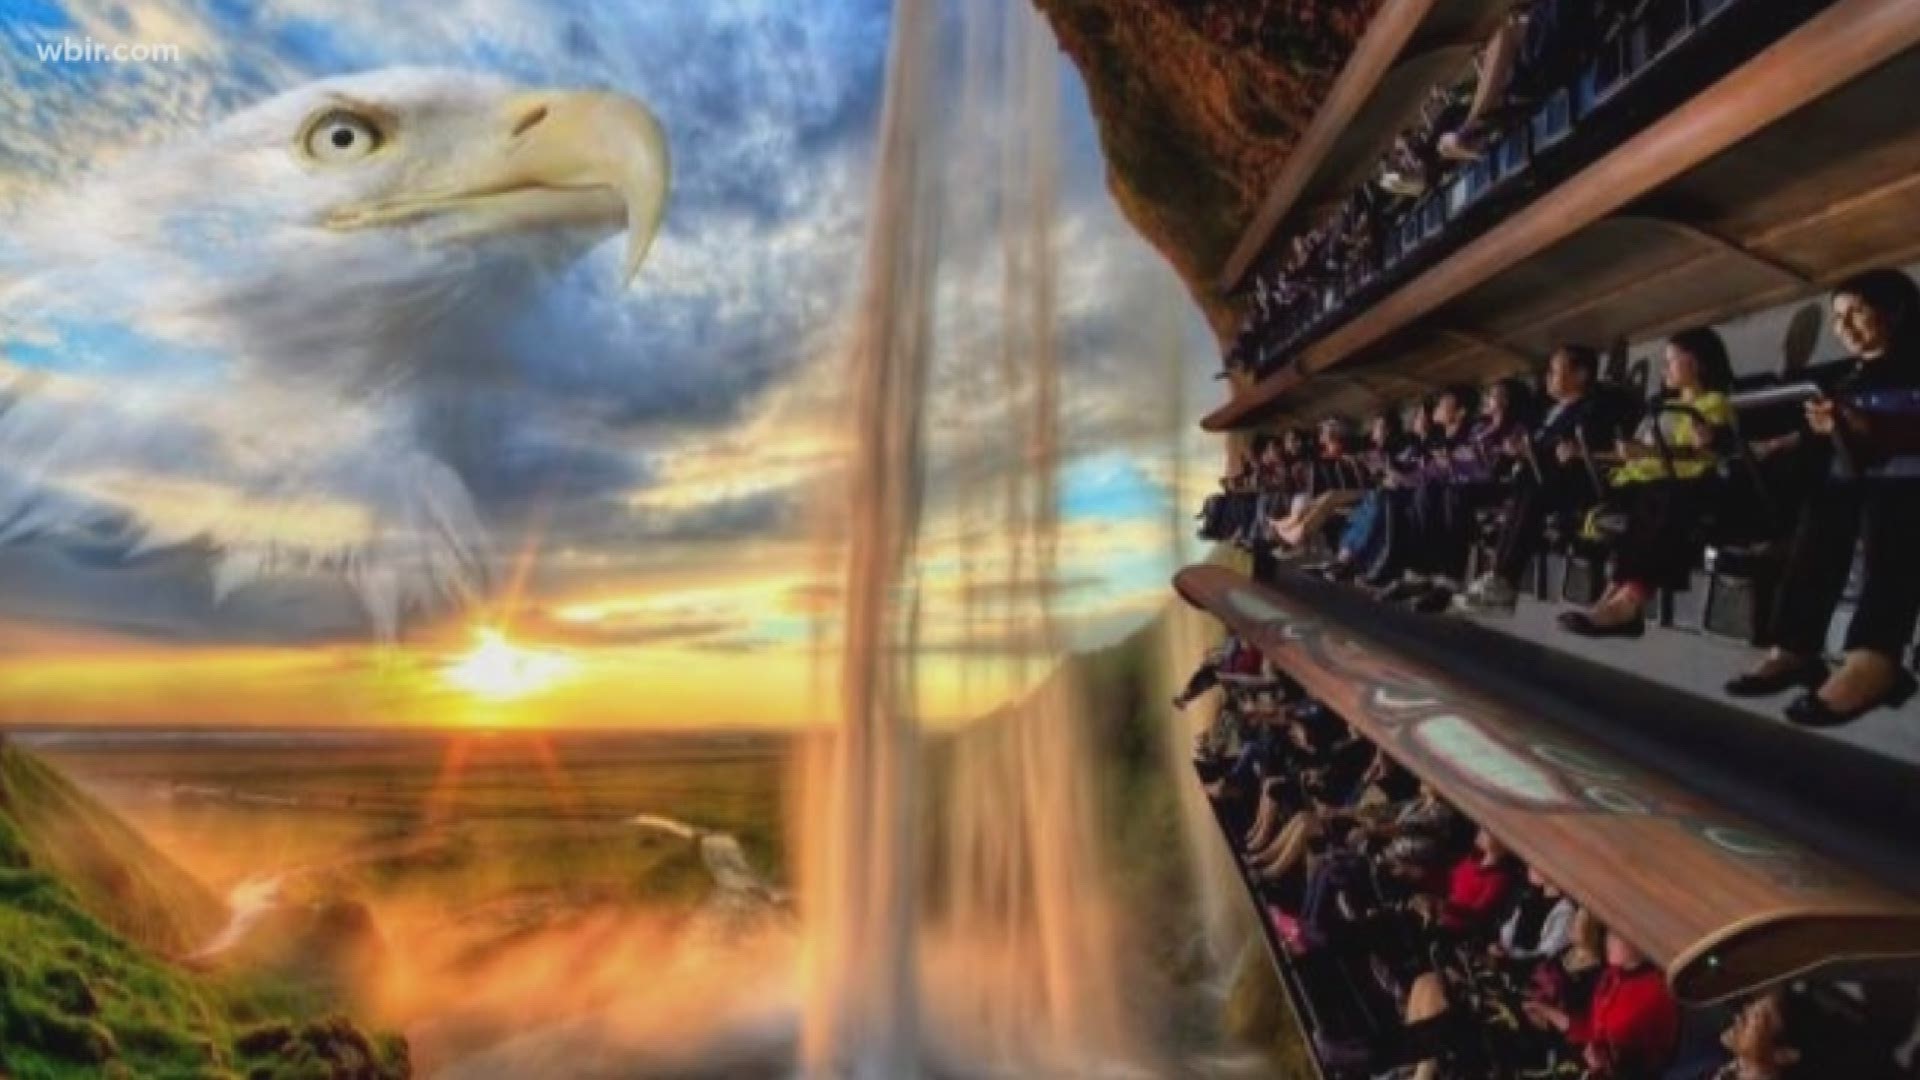 According to a press release -- the new attraction will combine a state-of-the-art ride system with a custom film that features some of the country's most iconic landmarks and the beauty of East Tennessee.